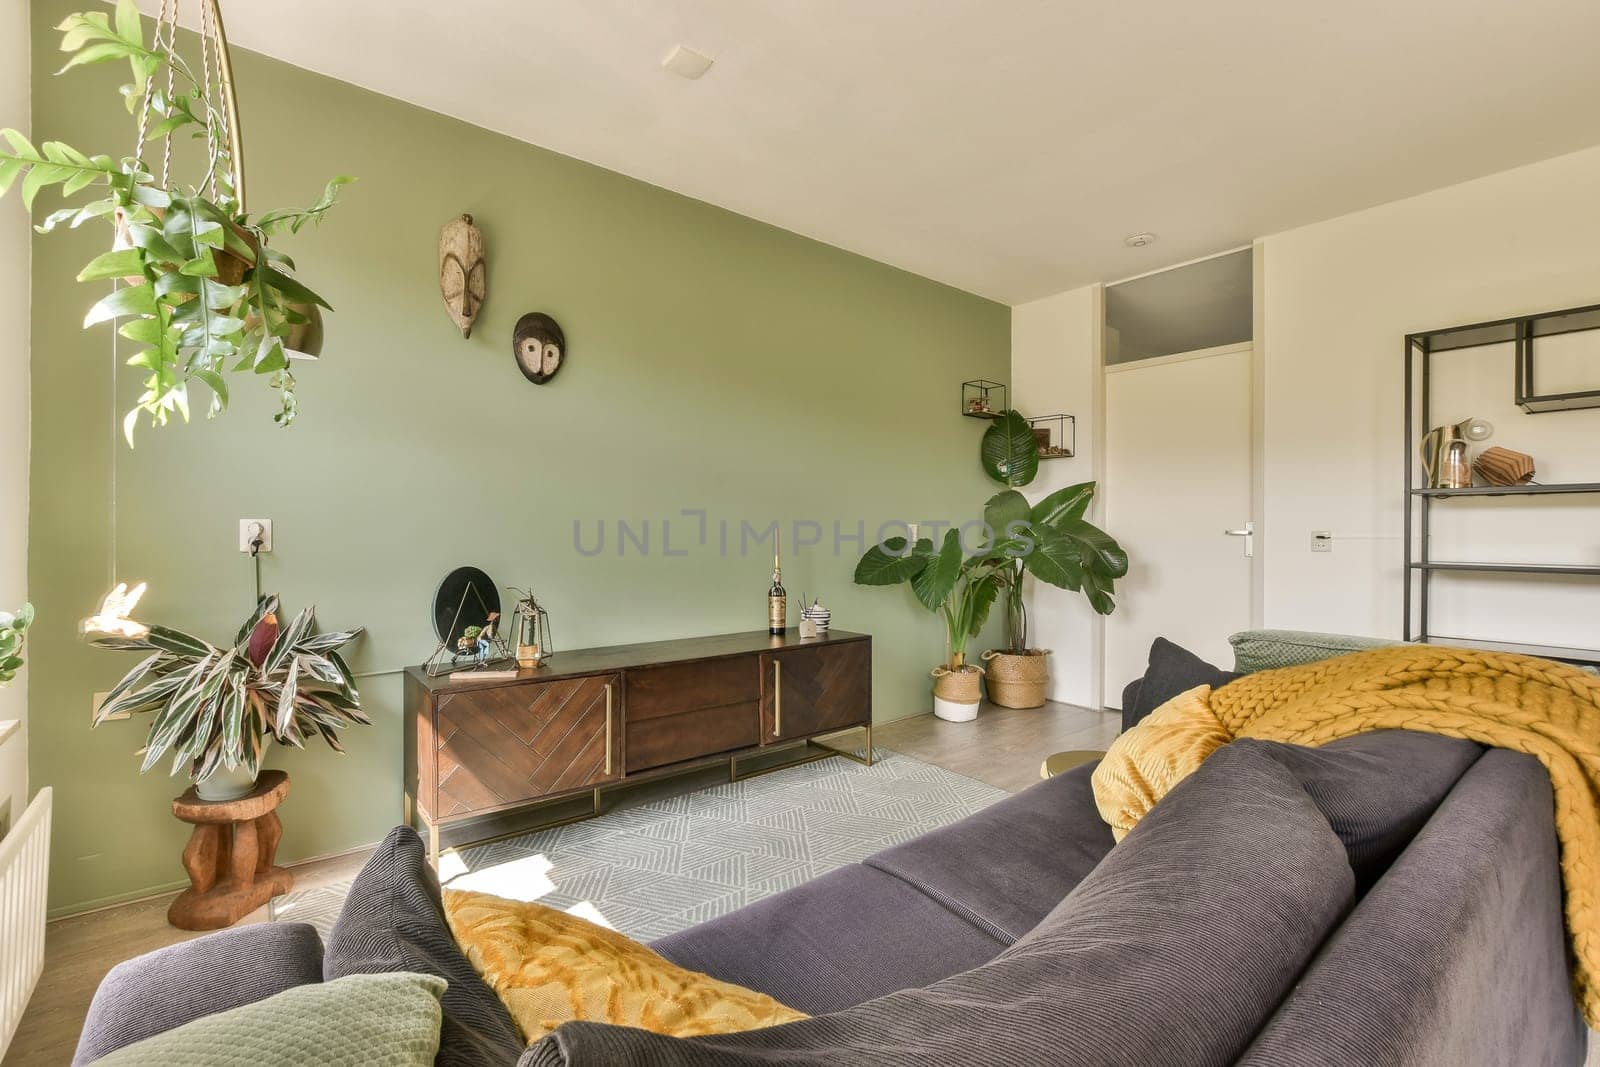 a living room with couches, plants and a tv set on the wall in the room is bright green